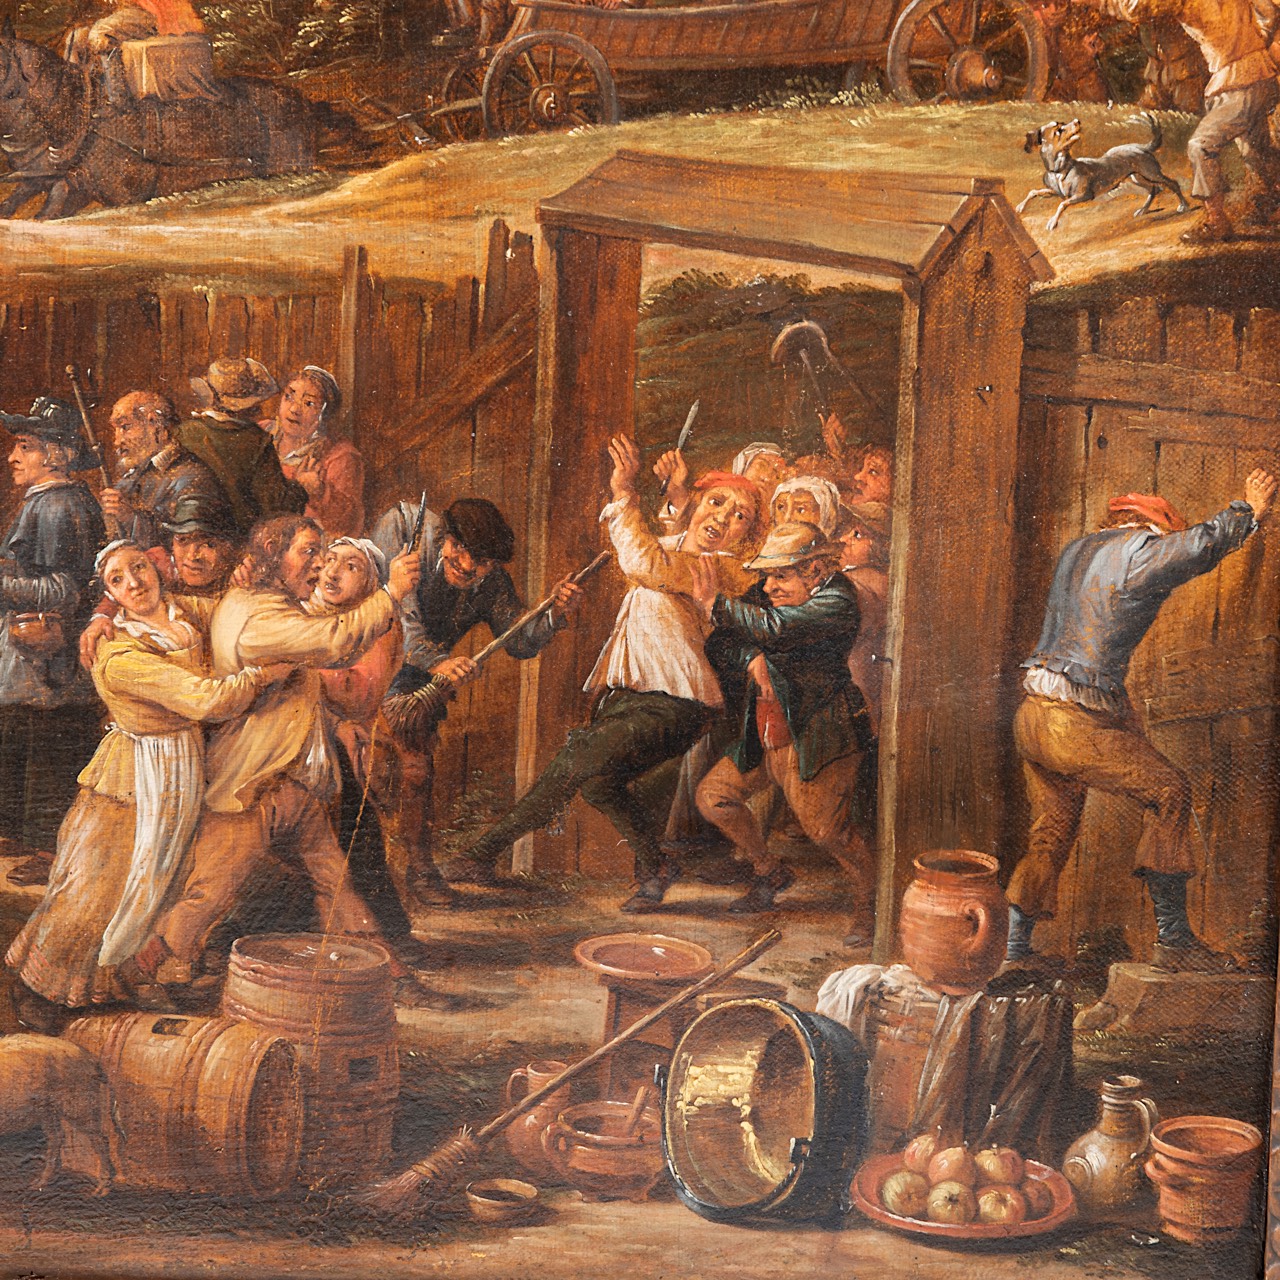 Attrib. to David II Teniers (1610-1690), village with an inn and peasants feasting and dancing, oil - Image 8 of 10